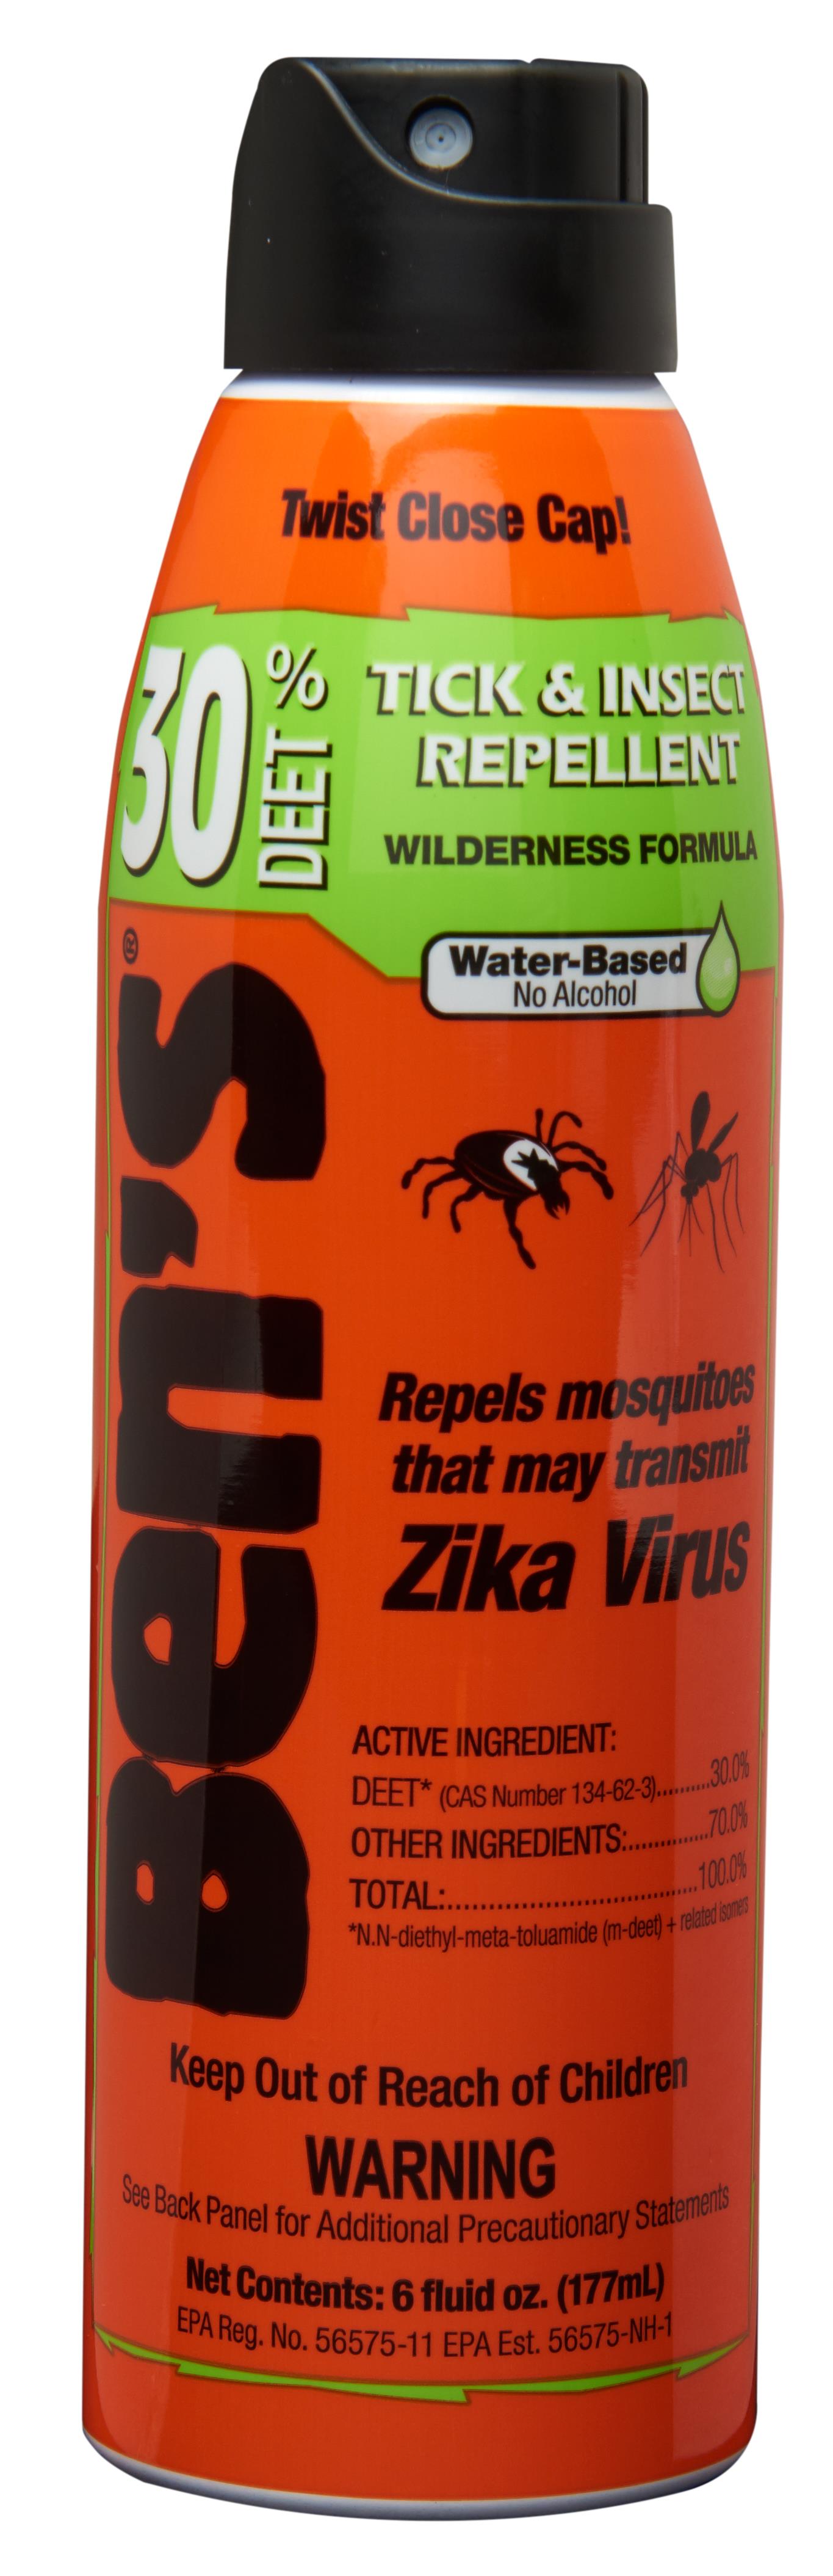 BENS 30 TICK & INSECT REPELLENT 6 OZ - Outdoor Skin Protection